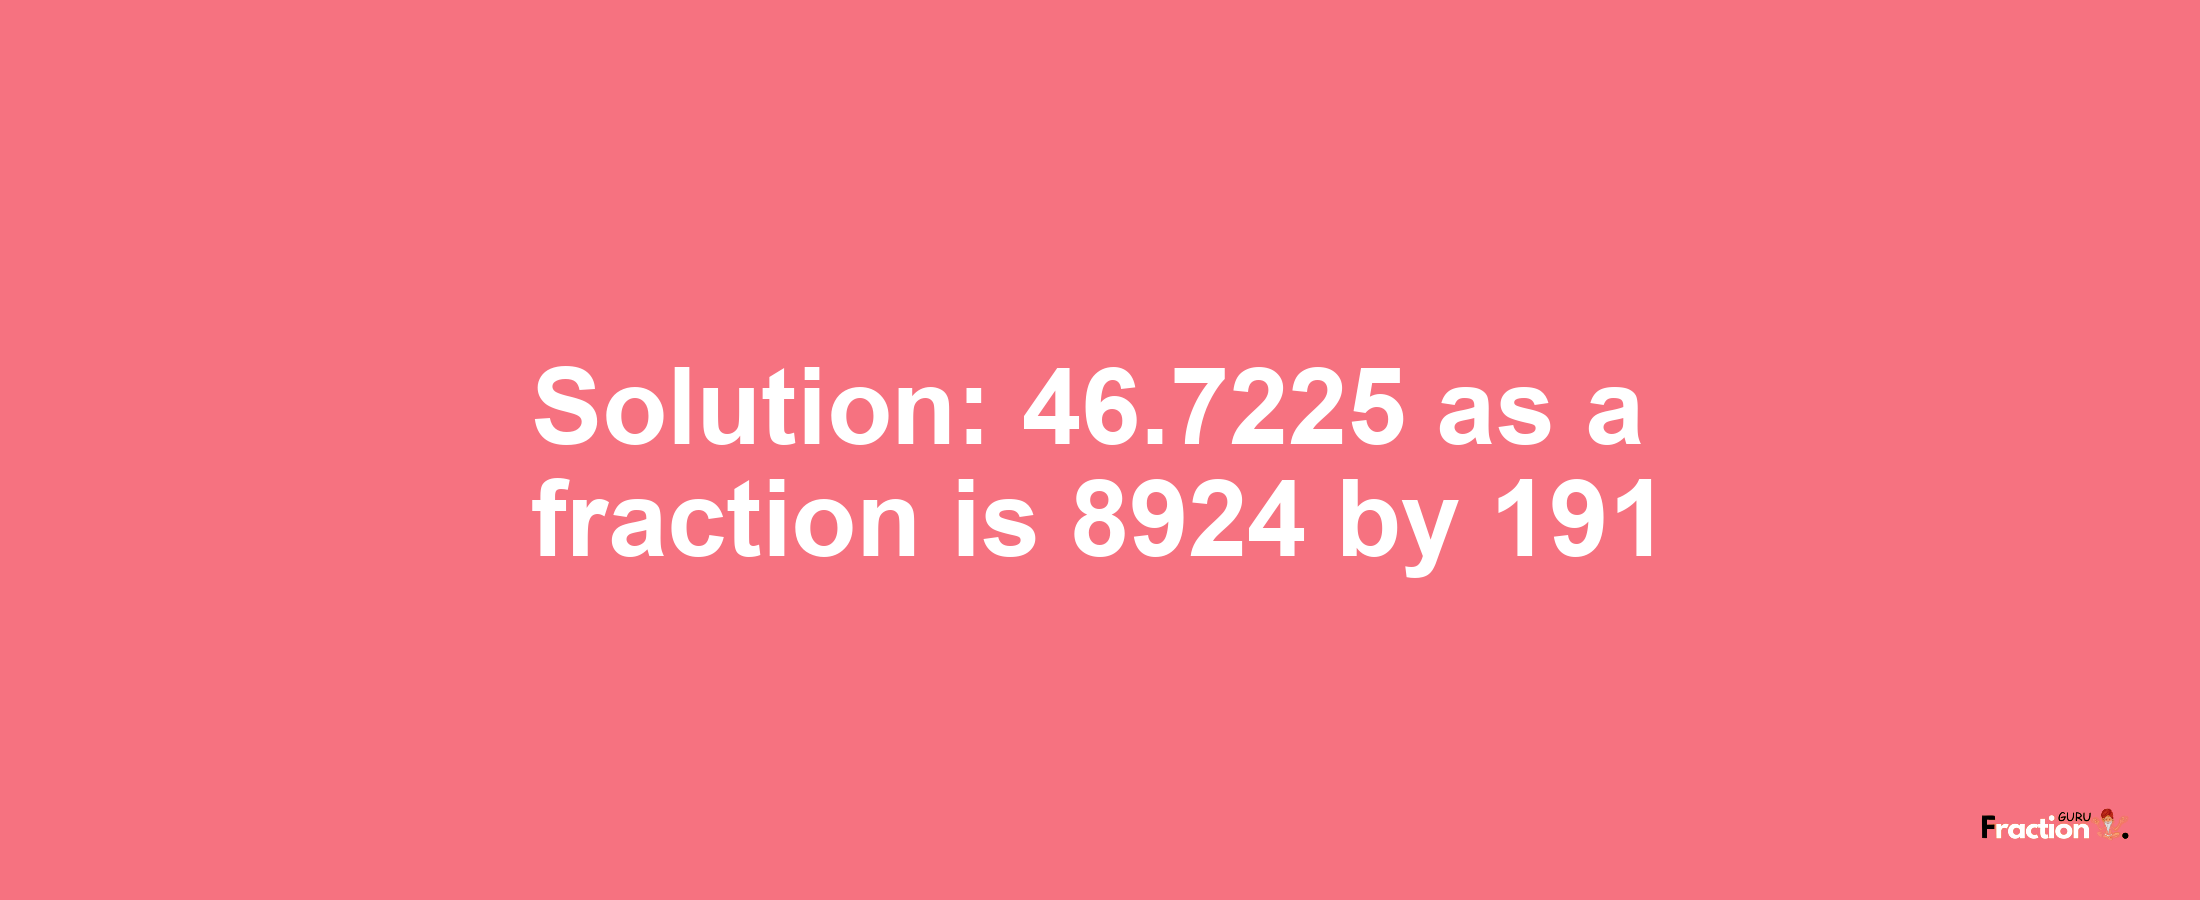 Solution:46.7225 as a fraction is 8924/191